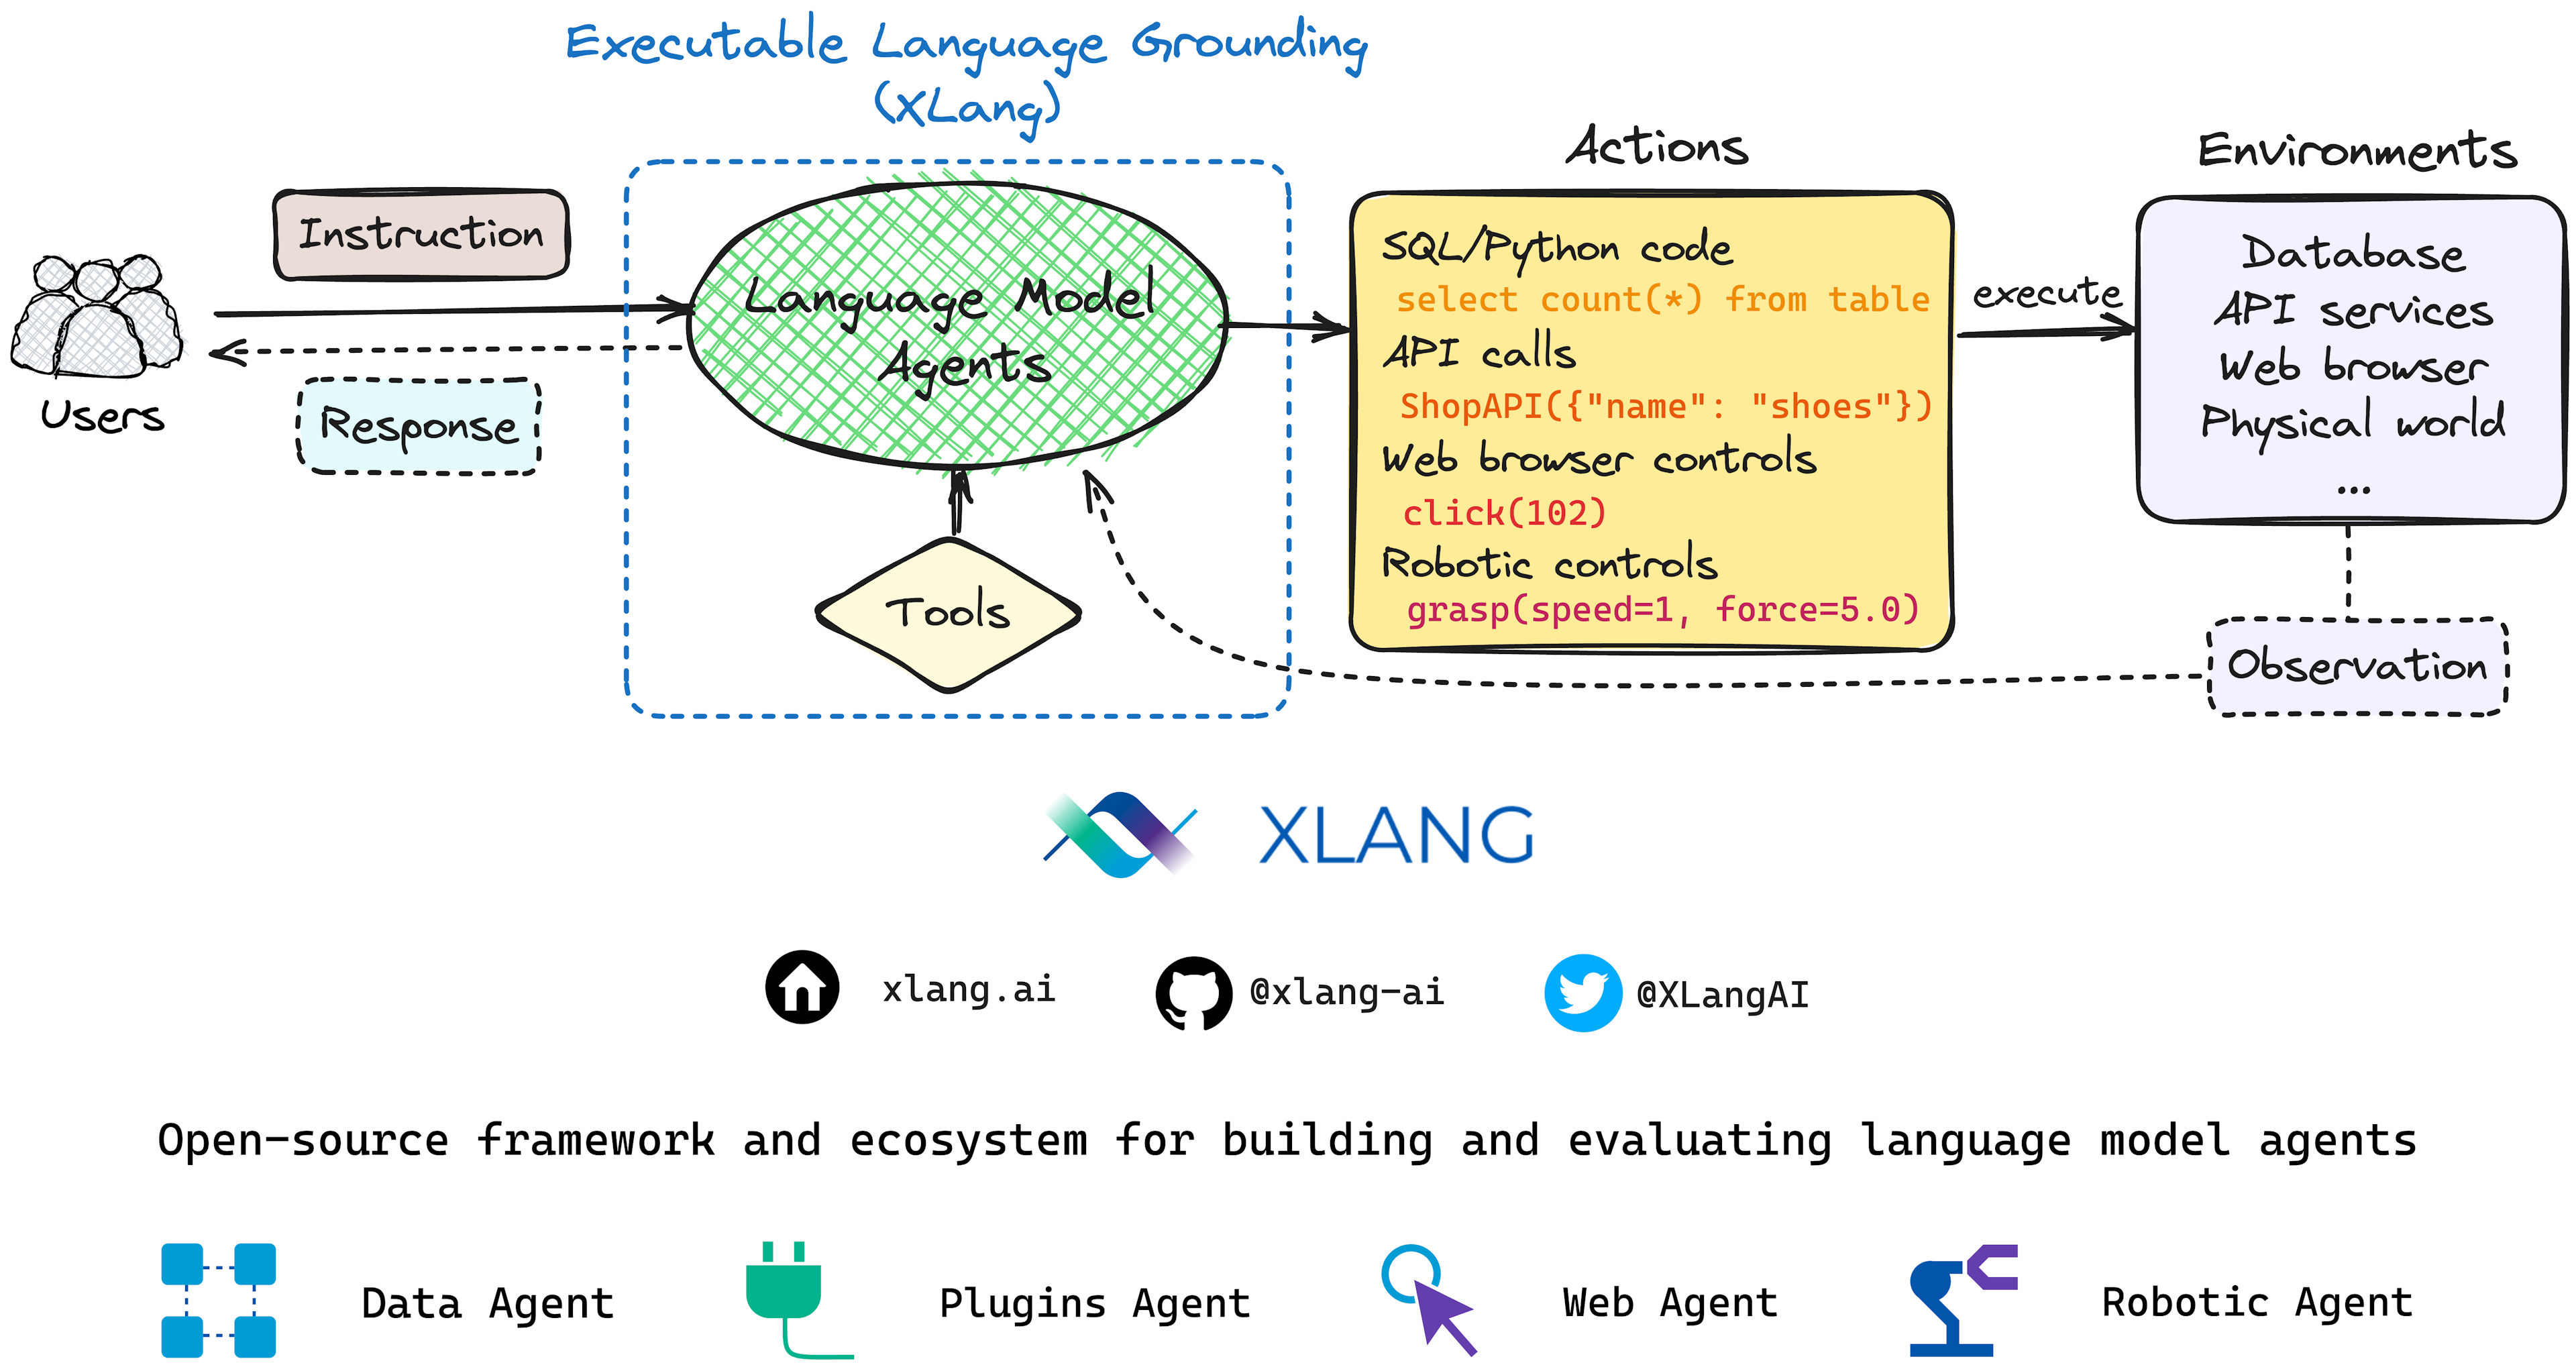 Introducing XLang: An Open-Source Framework for Building Language Model Agents via Executable Language Grounding